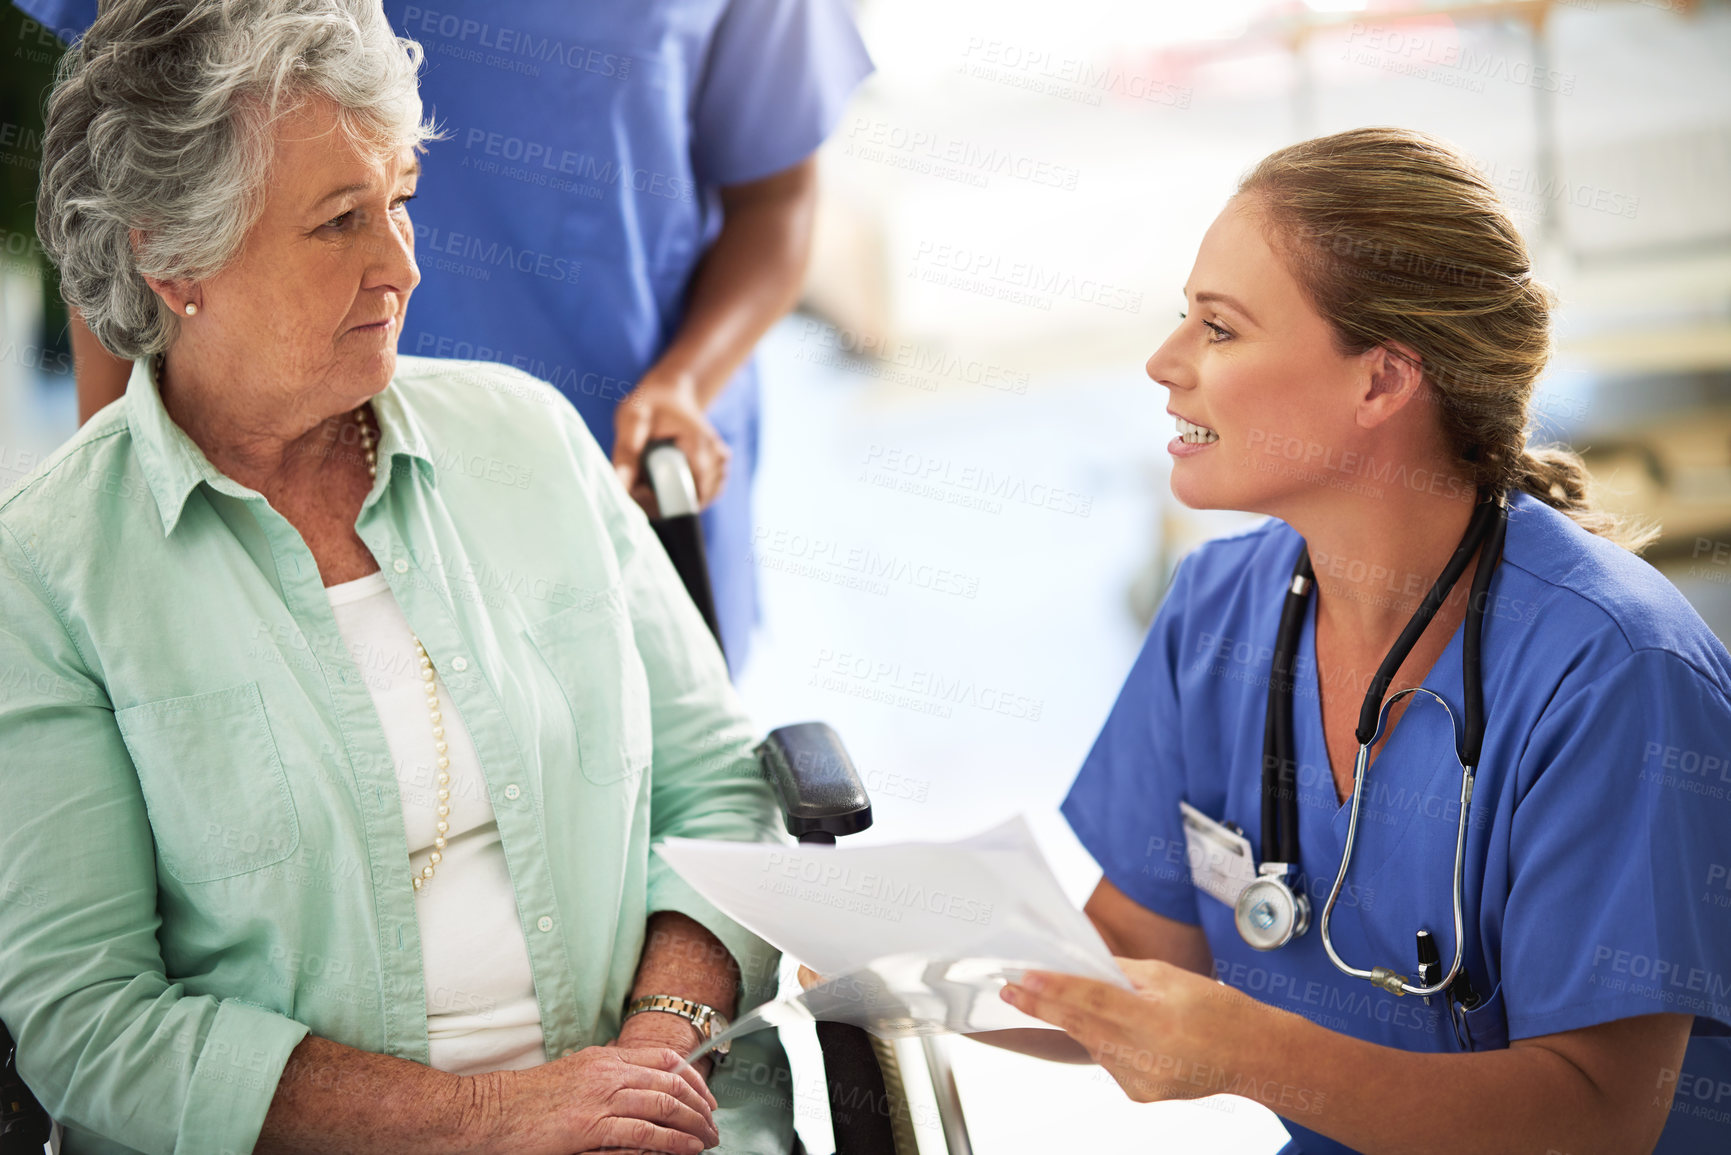 Buy stock photo Shot of a doctor discussing treatments with a senior woman sitting in wheelchair in a hospital